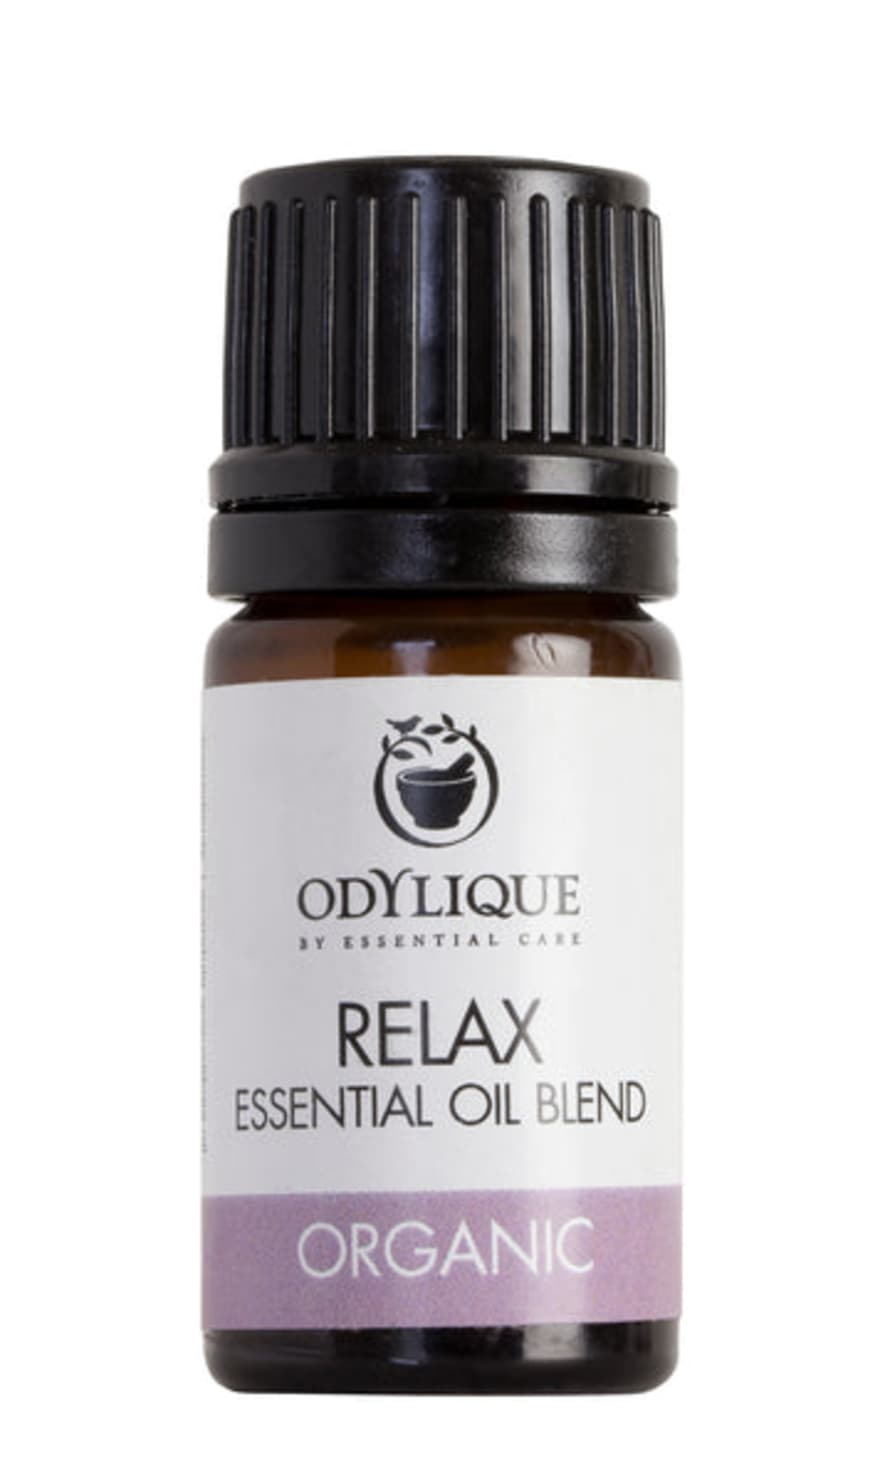 Odylique Relax Essential Oil Blend